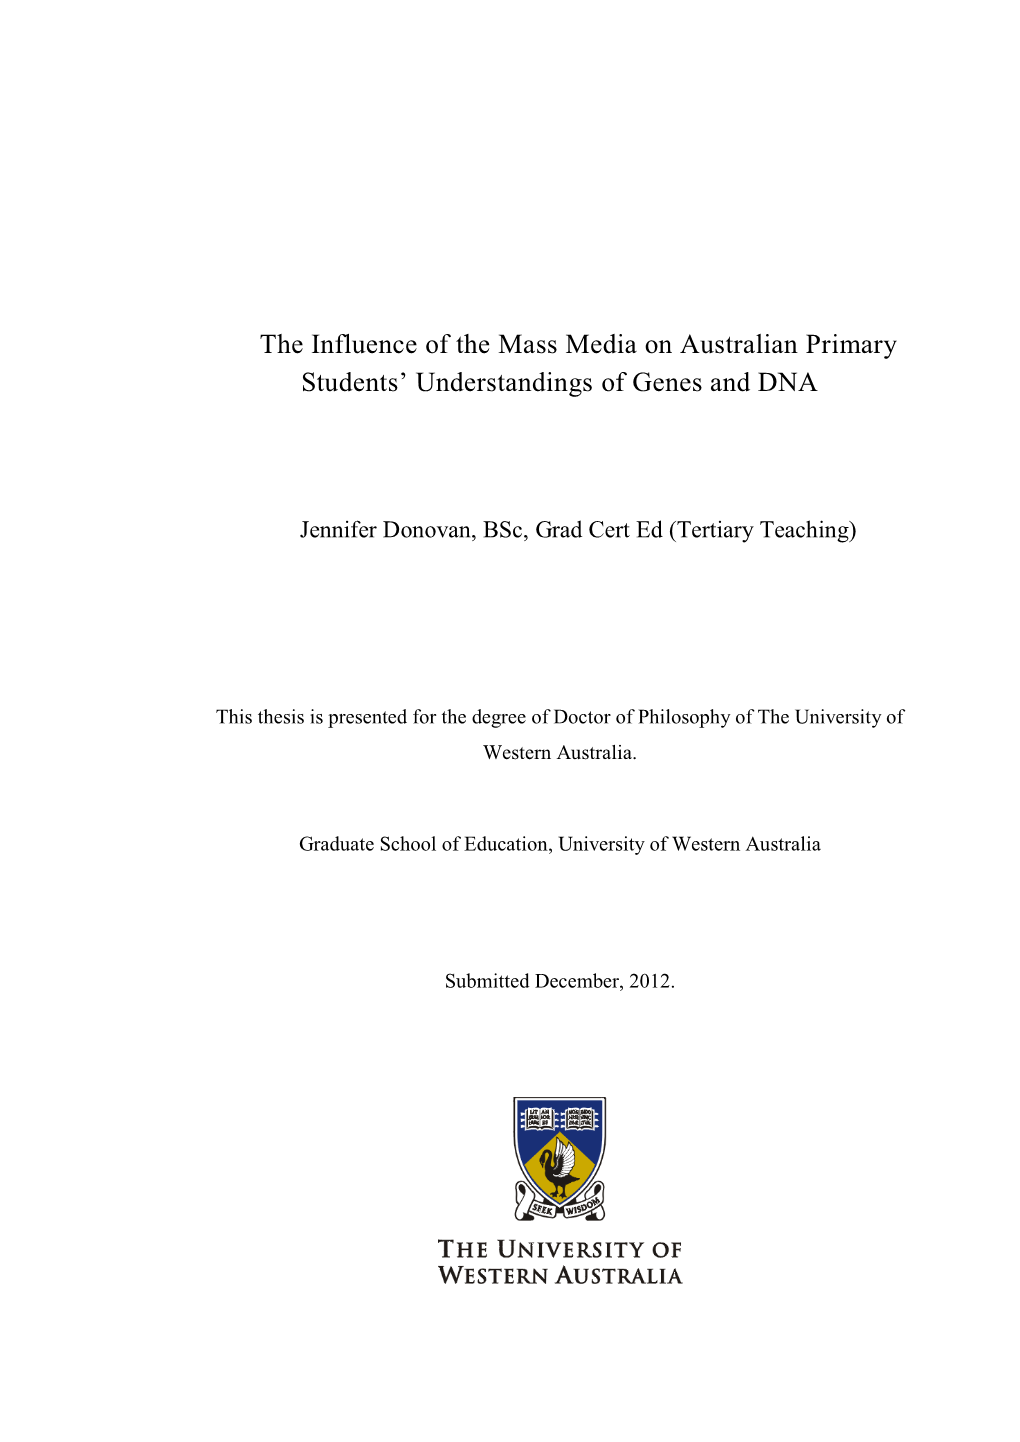 The Influence of the Mass Media on Australian Primary Students’ Understandings of Genes and DNA